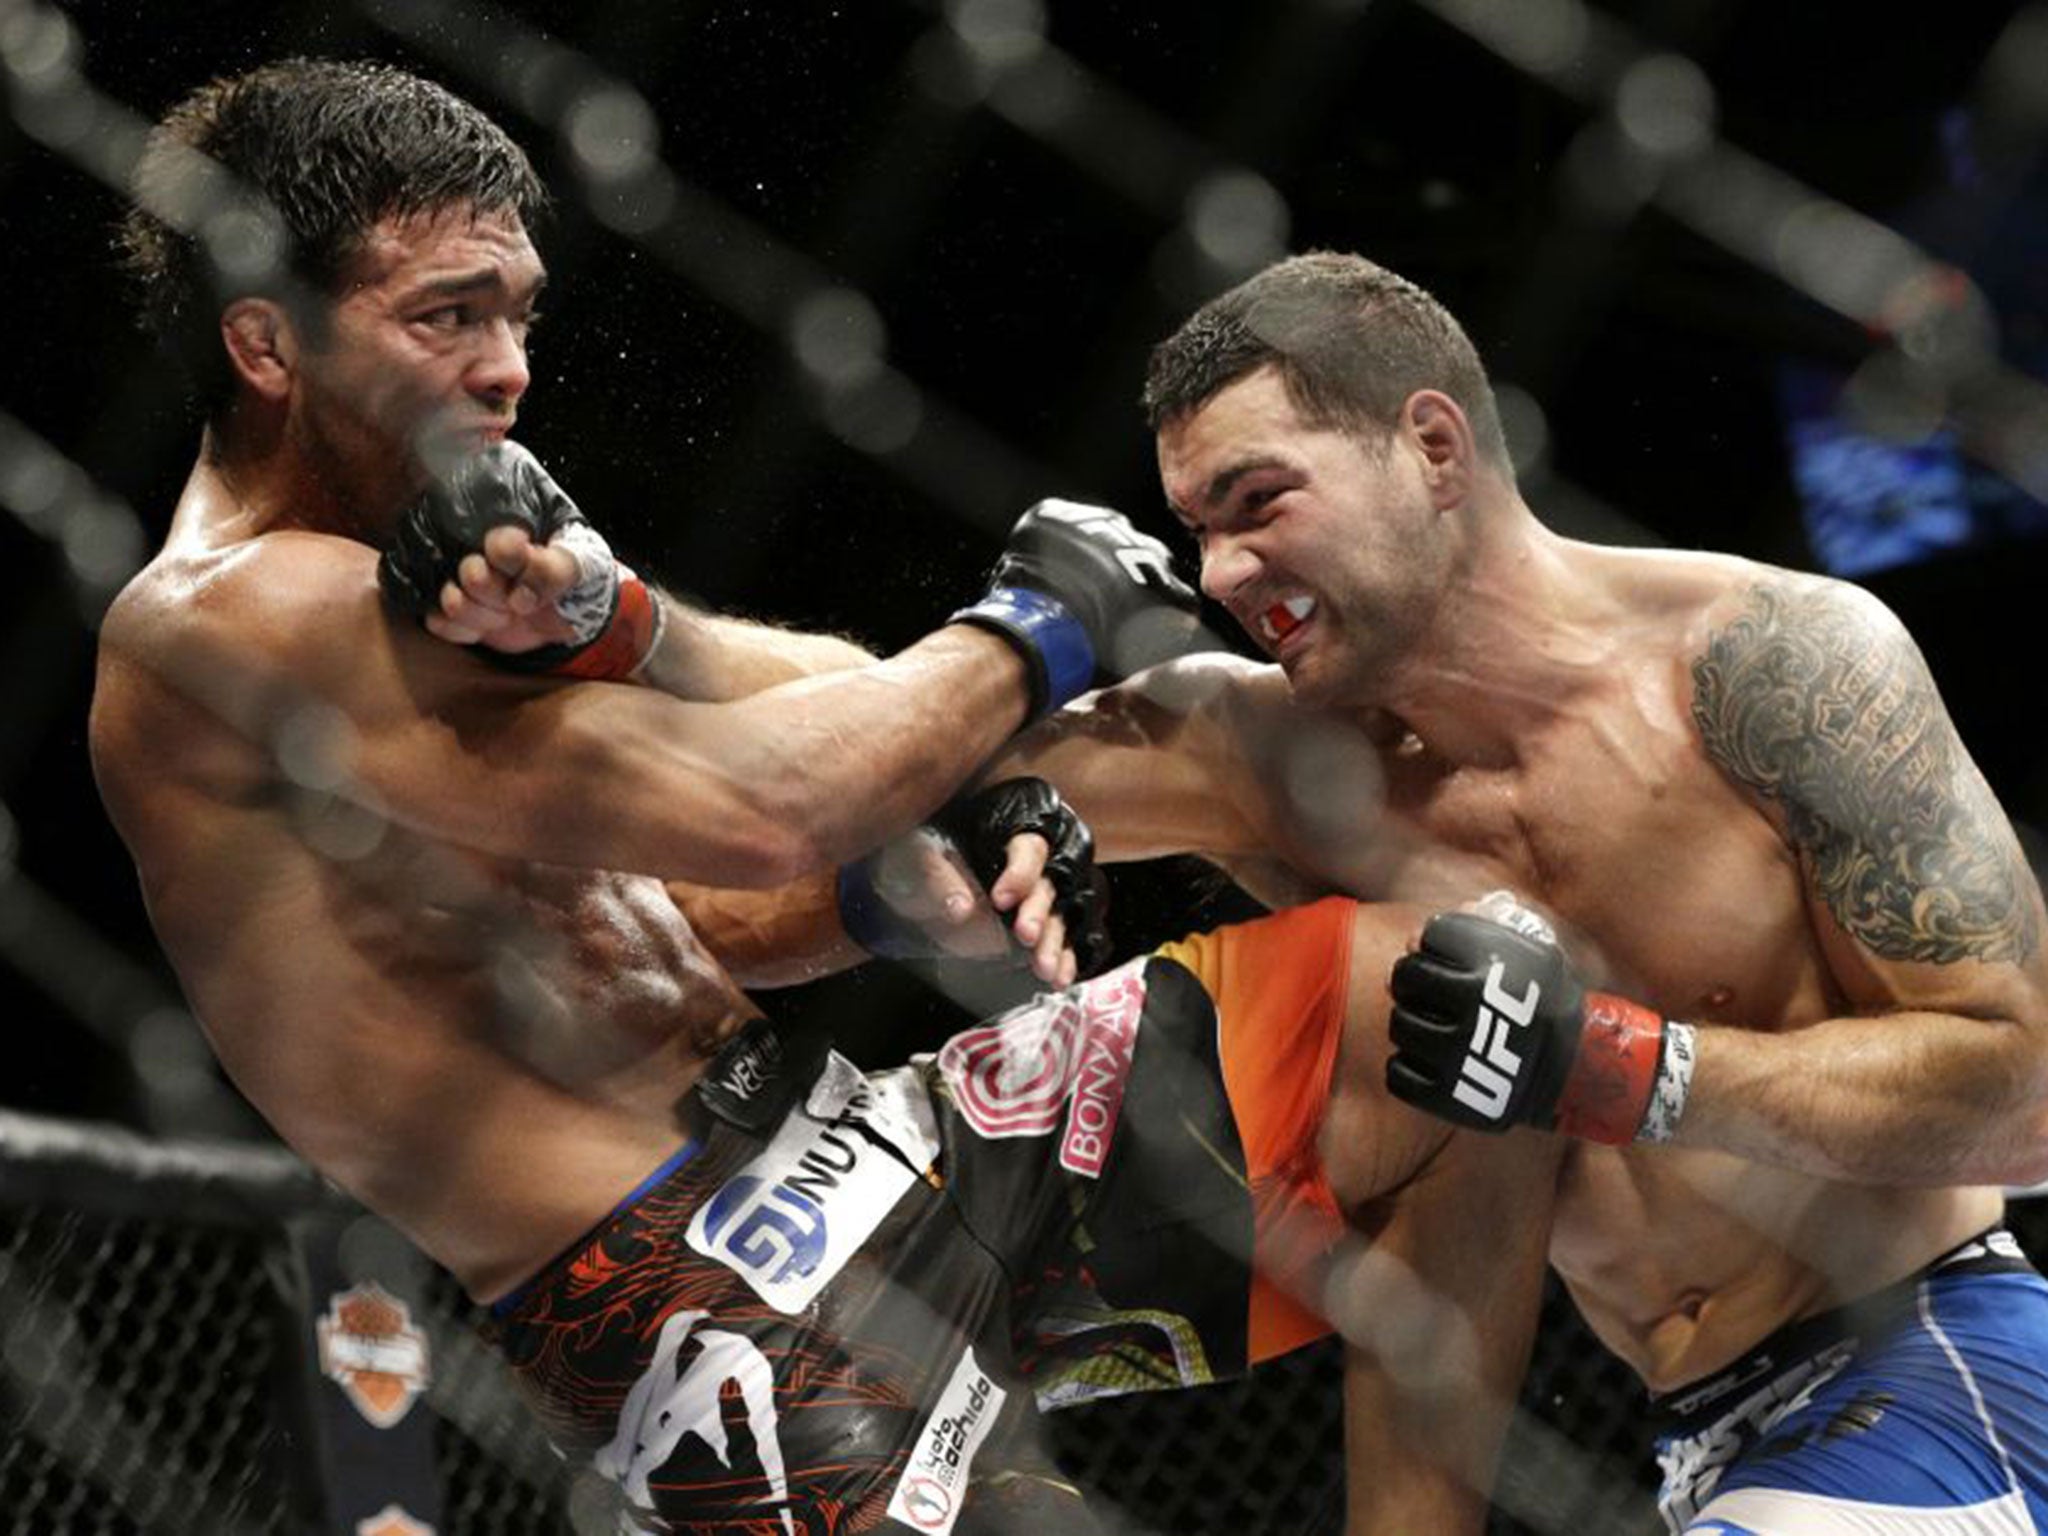 Chris Weidman (right) hits Lyoto Machida during their mixed martial arts middleweight title bout at UFC 175 Saturday